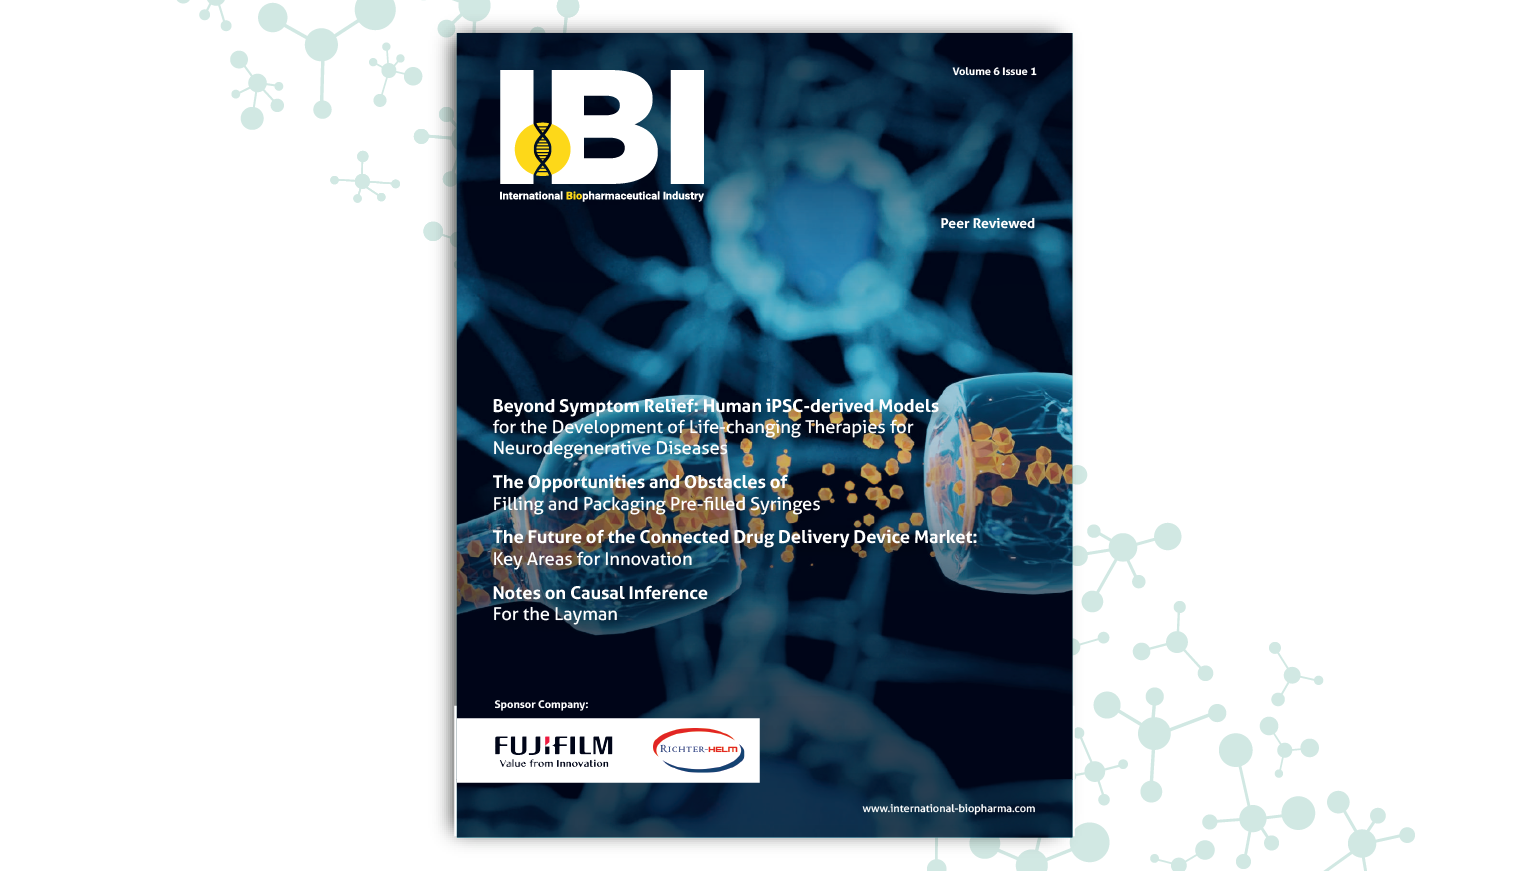 Front page of the International Biopharmaceutical Industry magazine